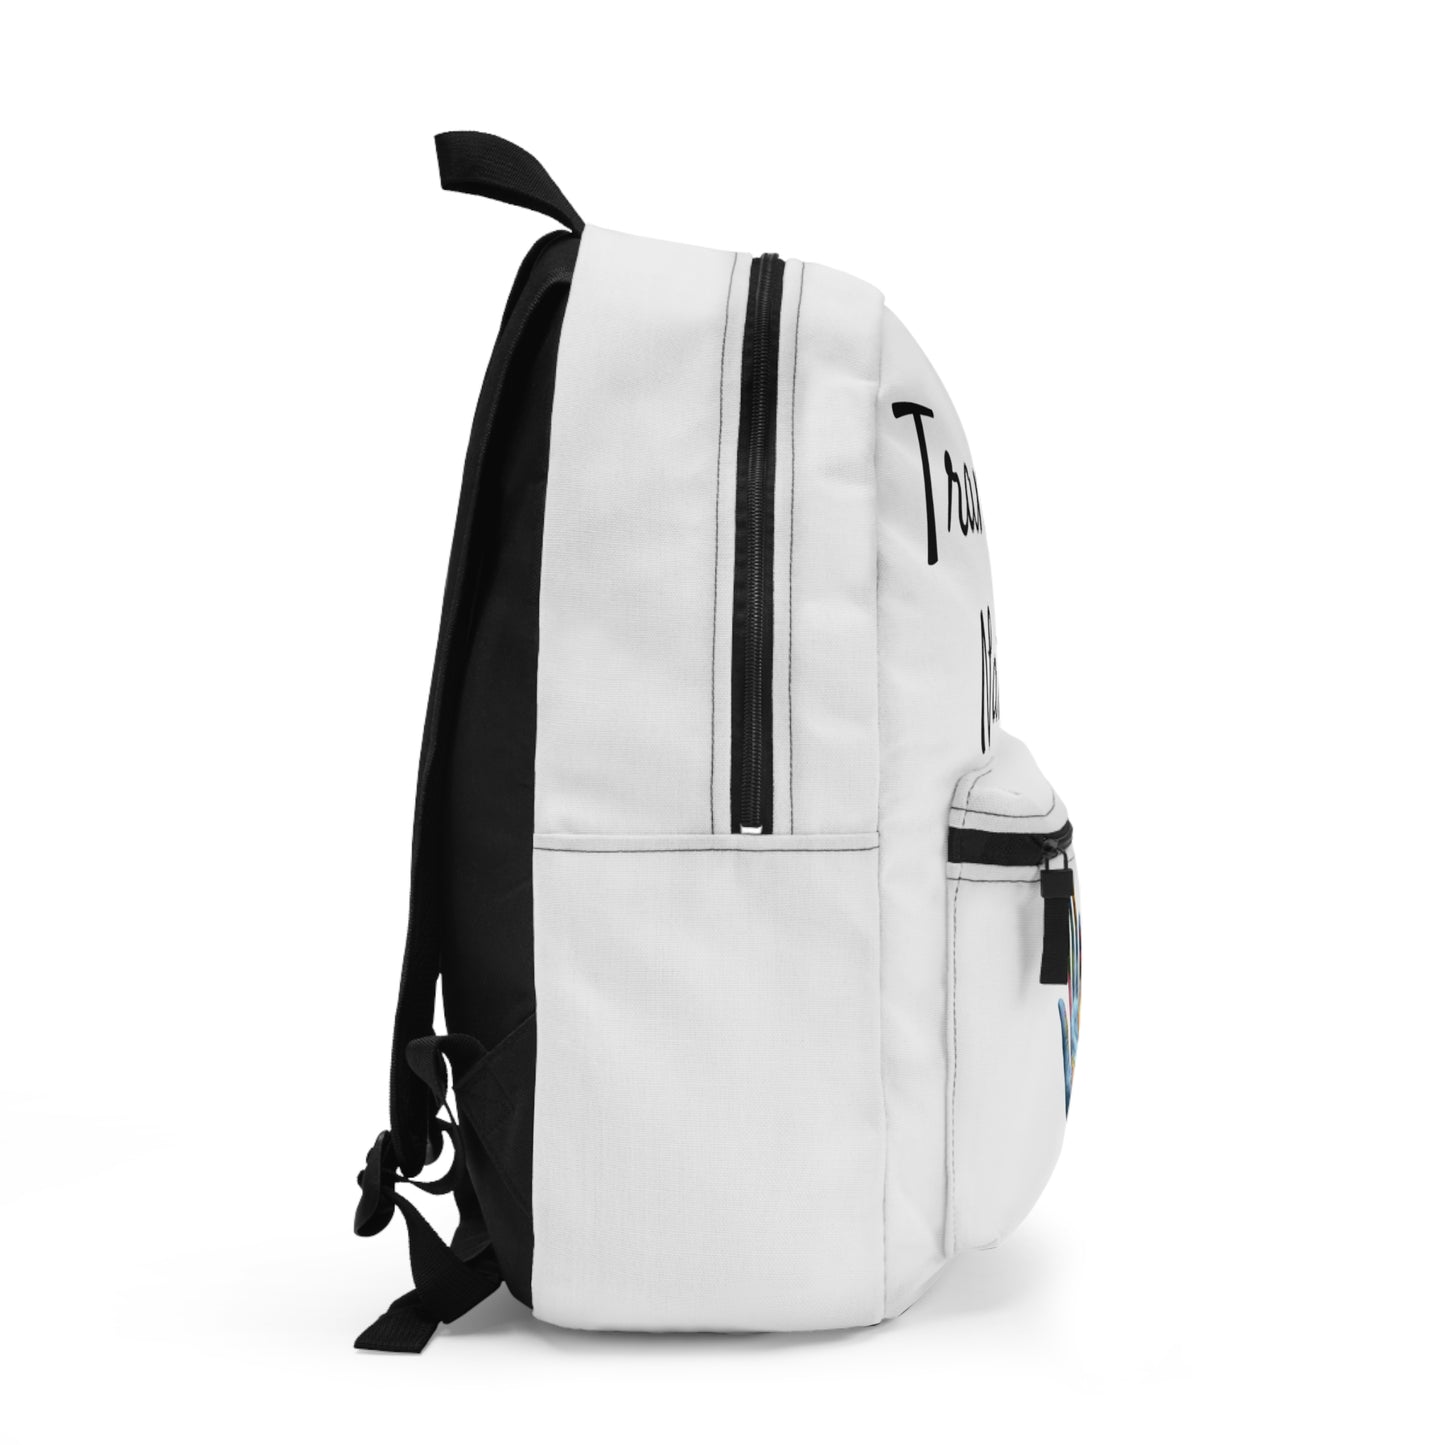 Transform Nations Backpack